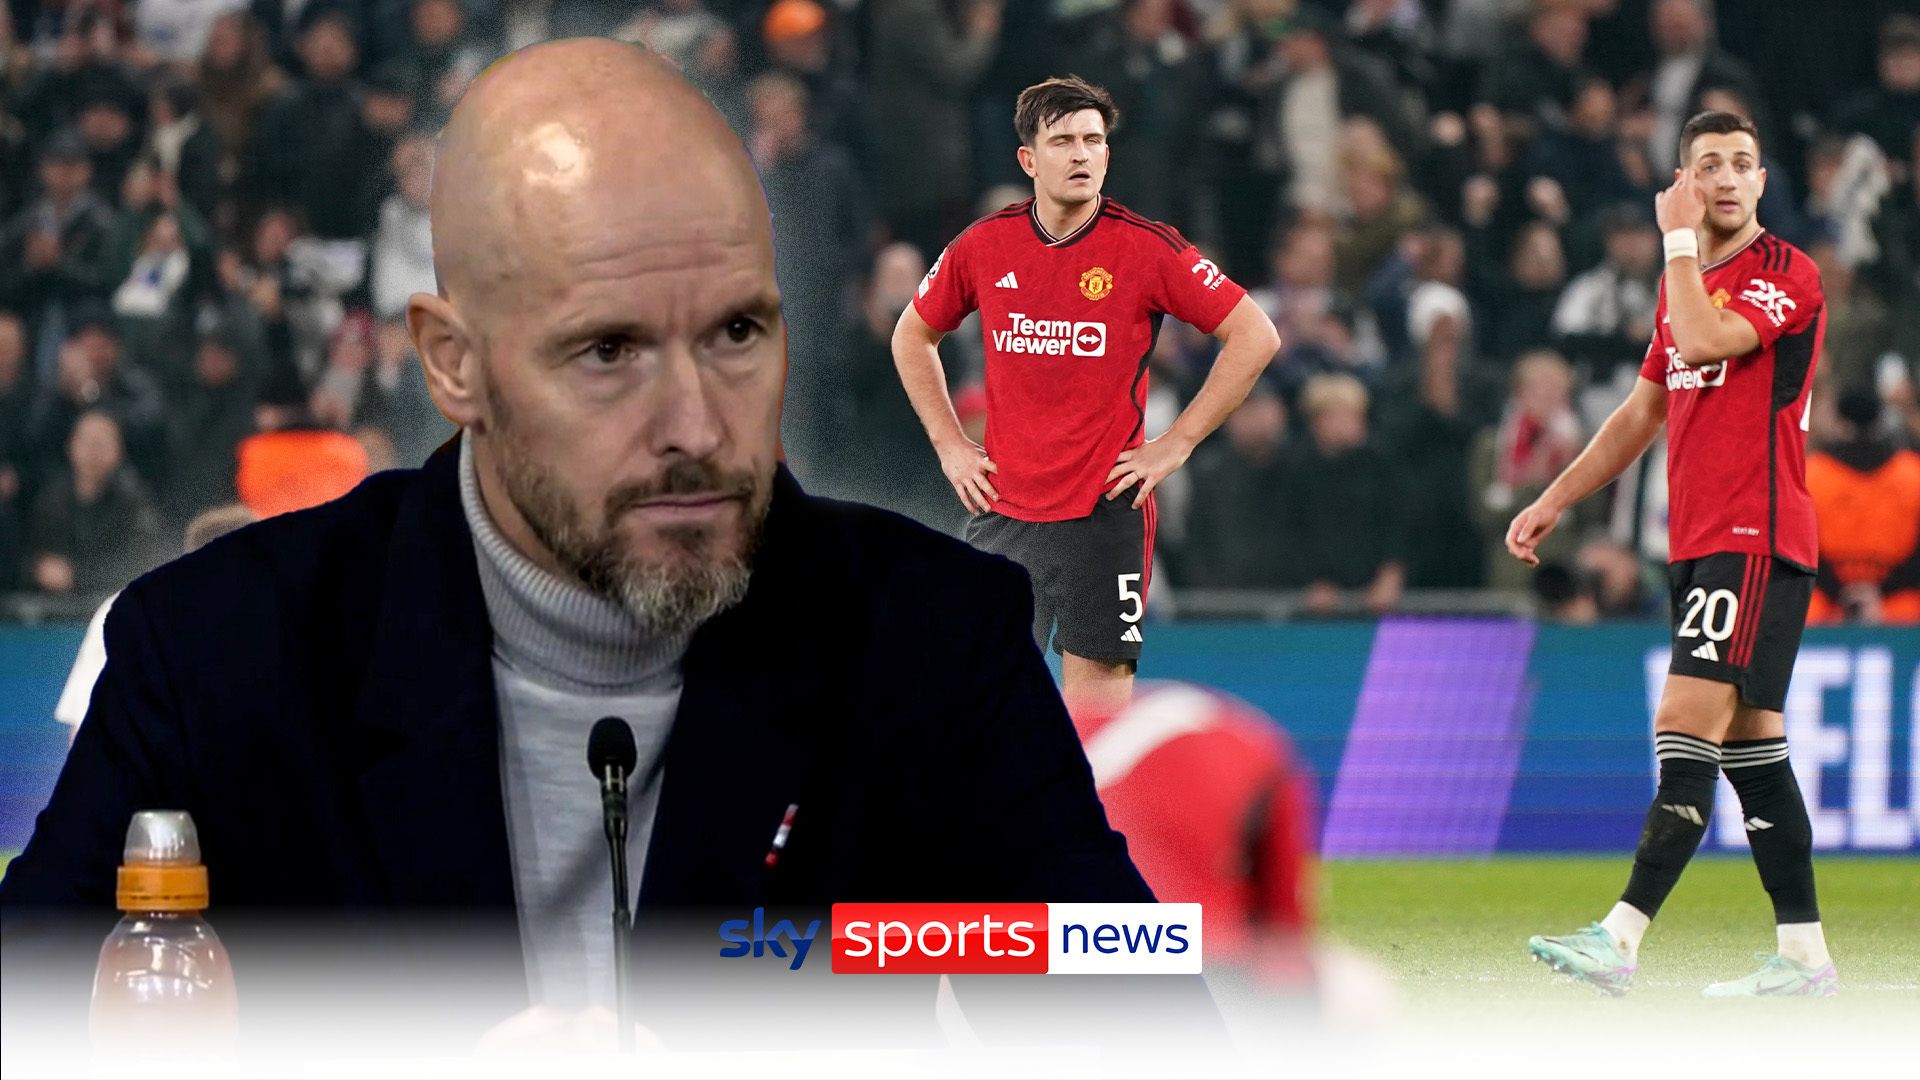 Ten Hag on decisions: Two goals shouldn't count, red is harsh